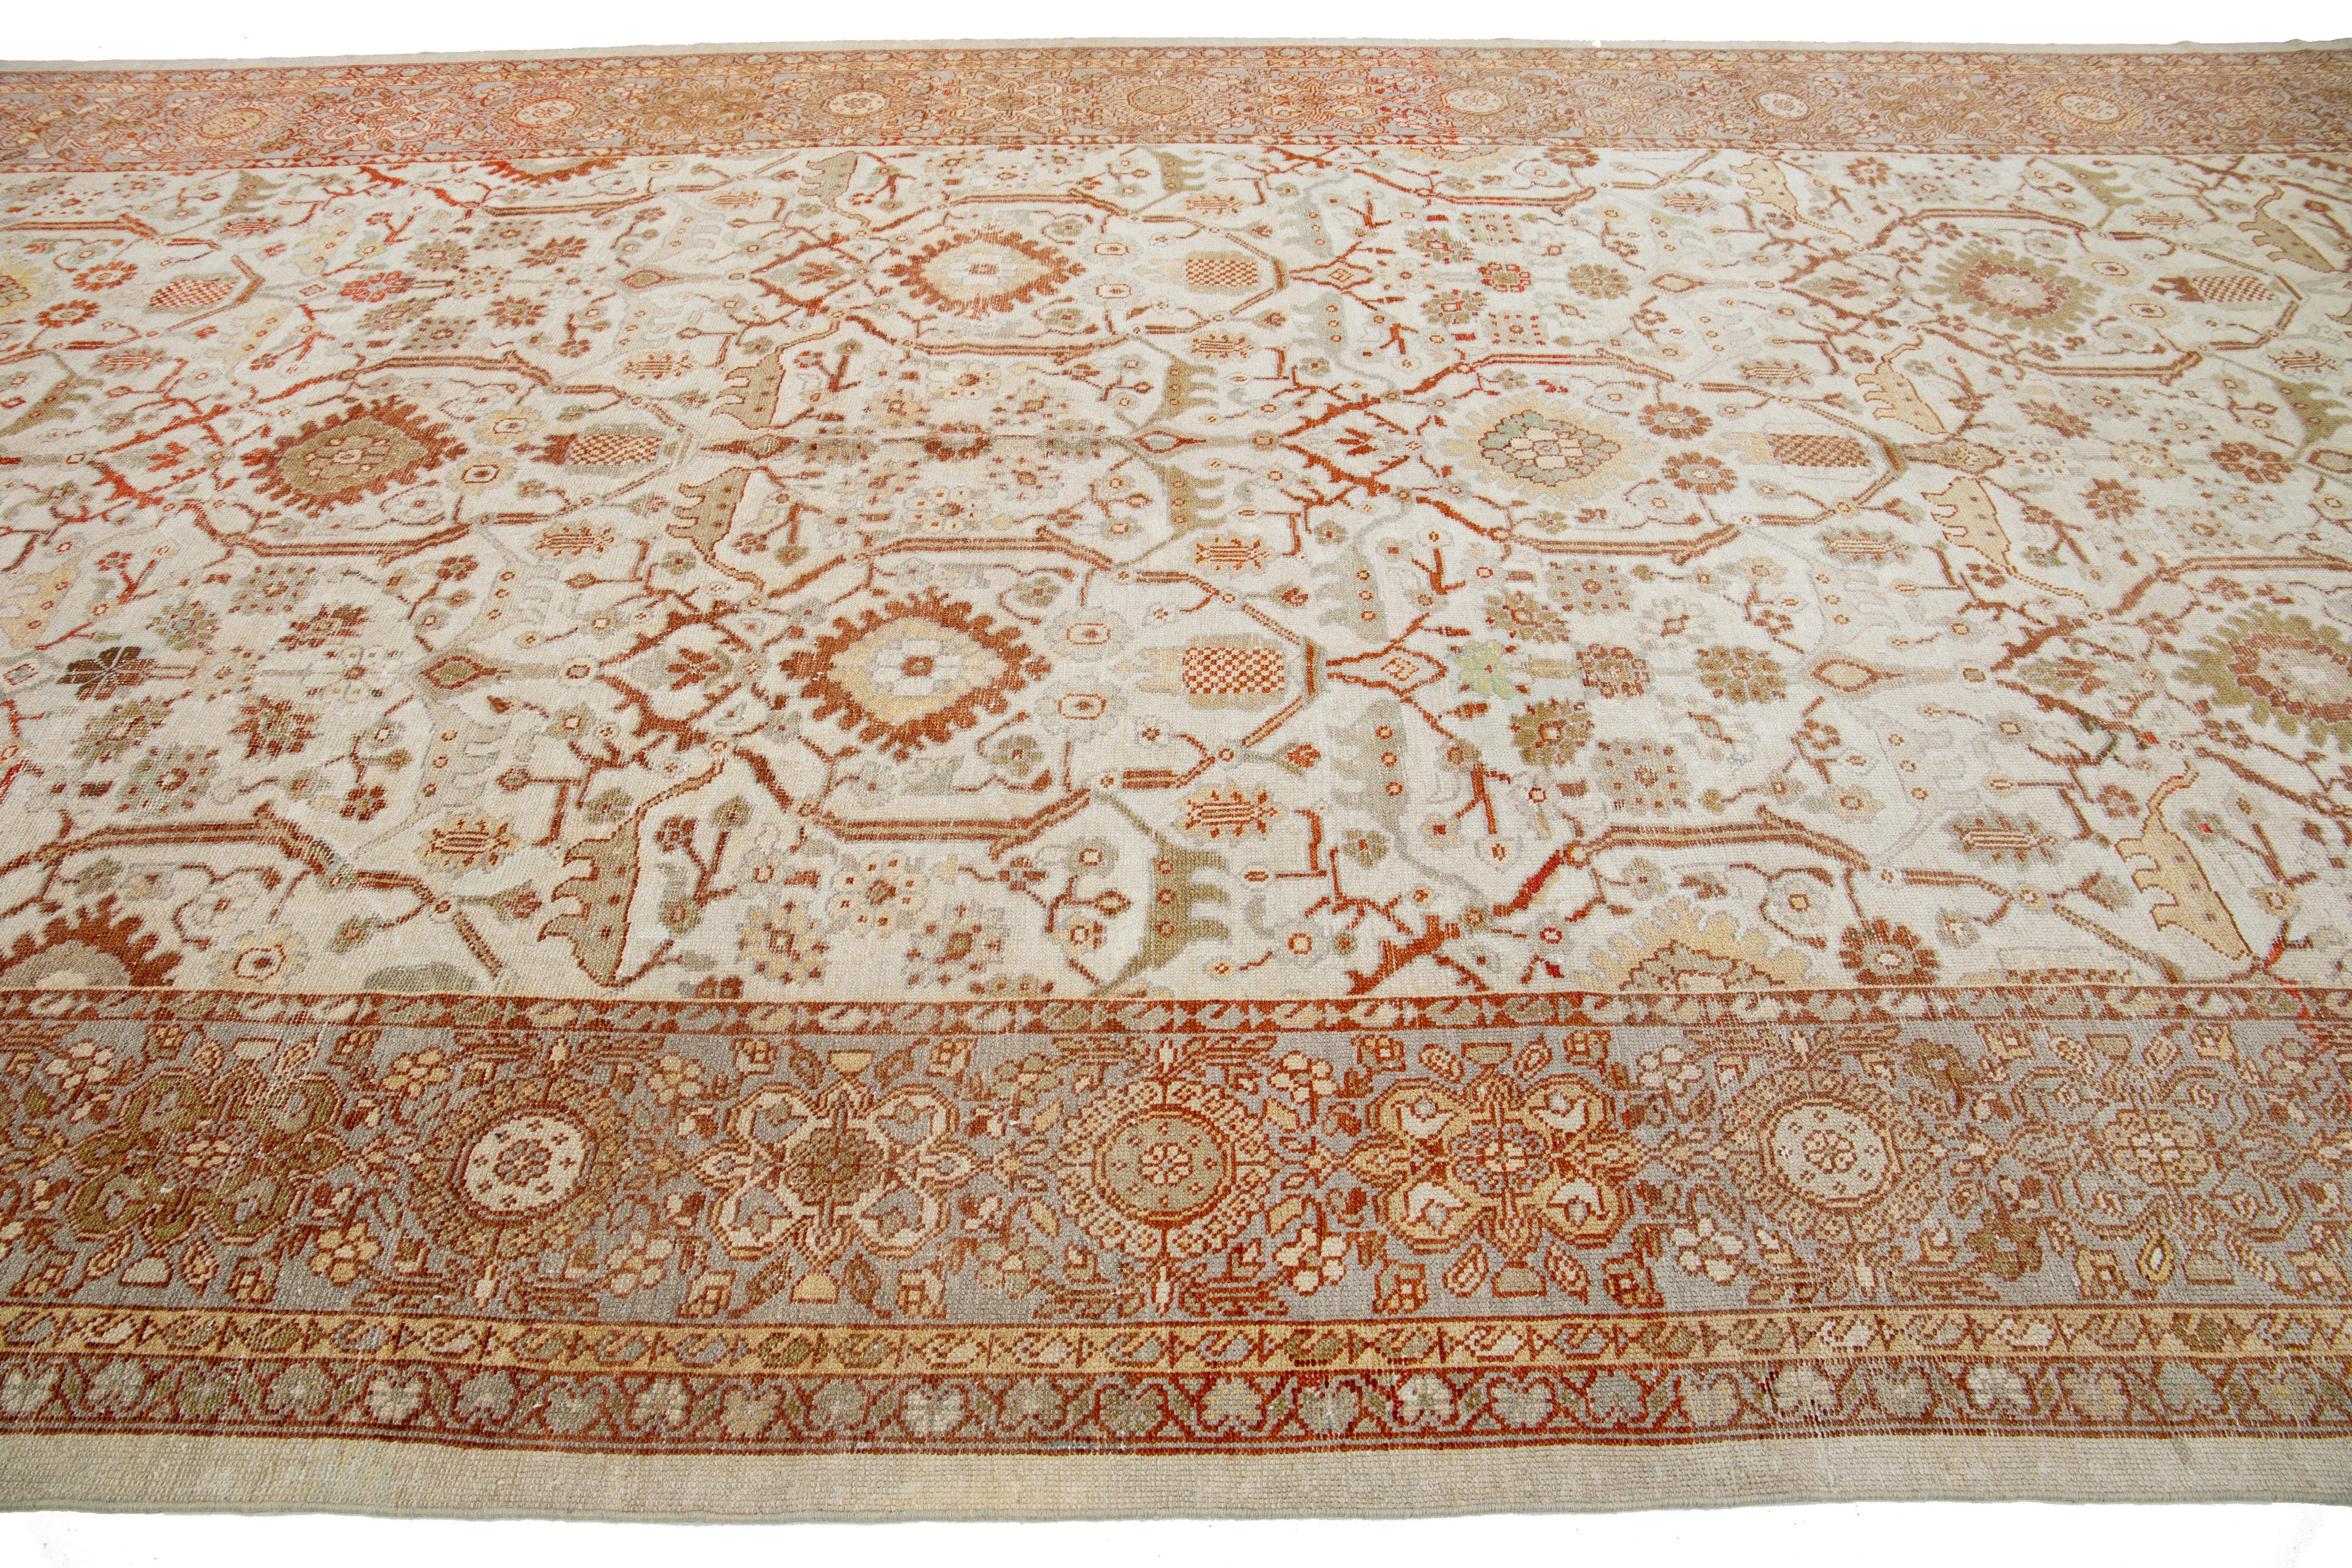 Hand-Knotted 1900s Sultanabad Persian Gallery Wool Rug In Beige and Orange With Floral Motif For Sale